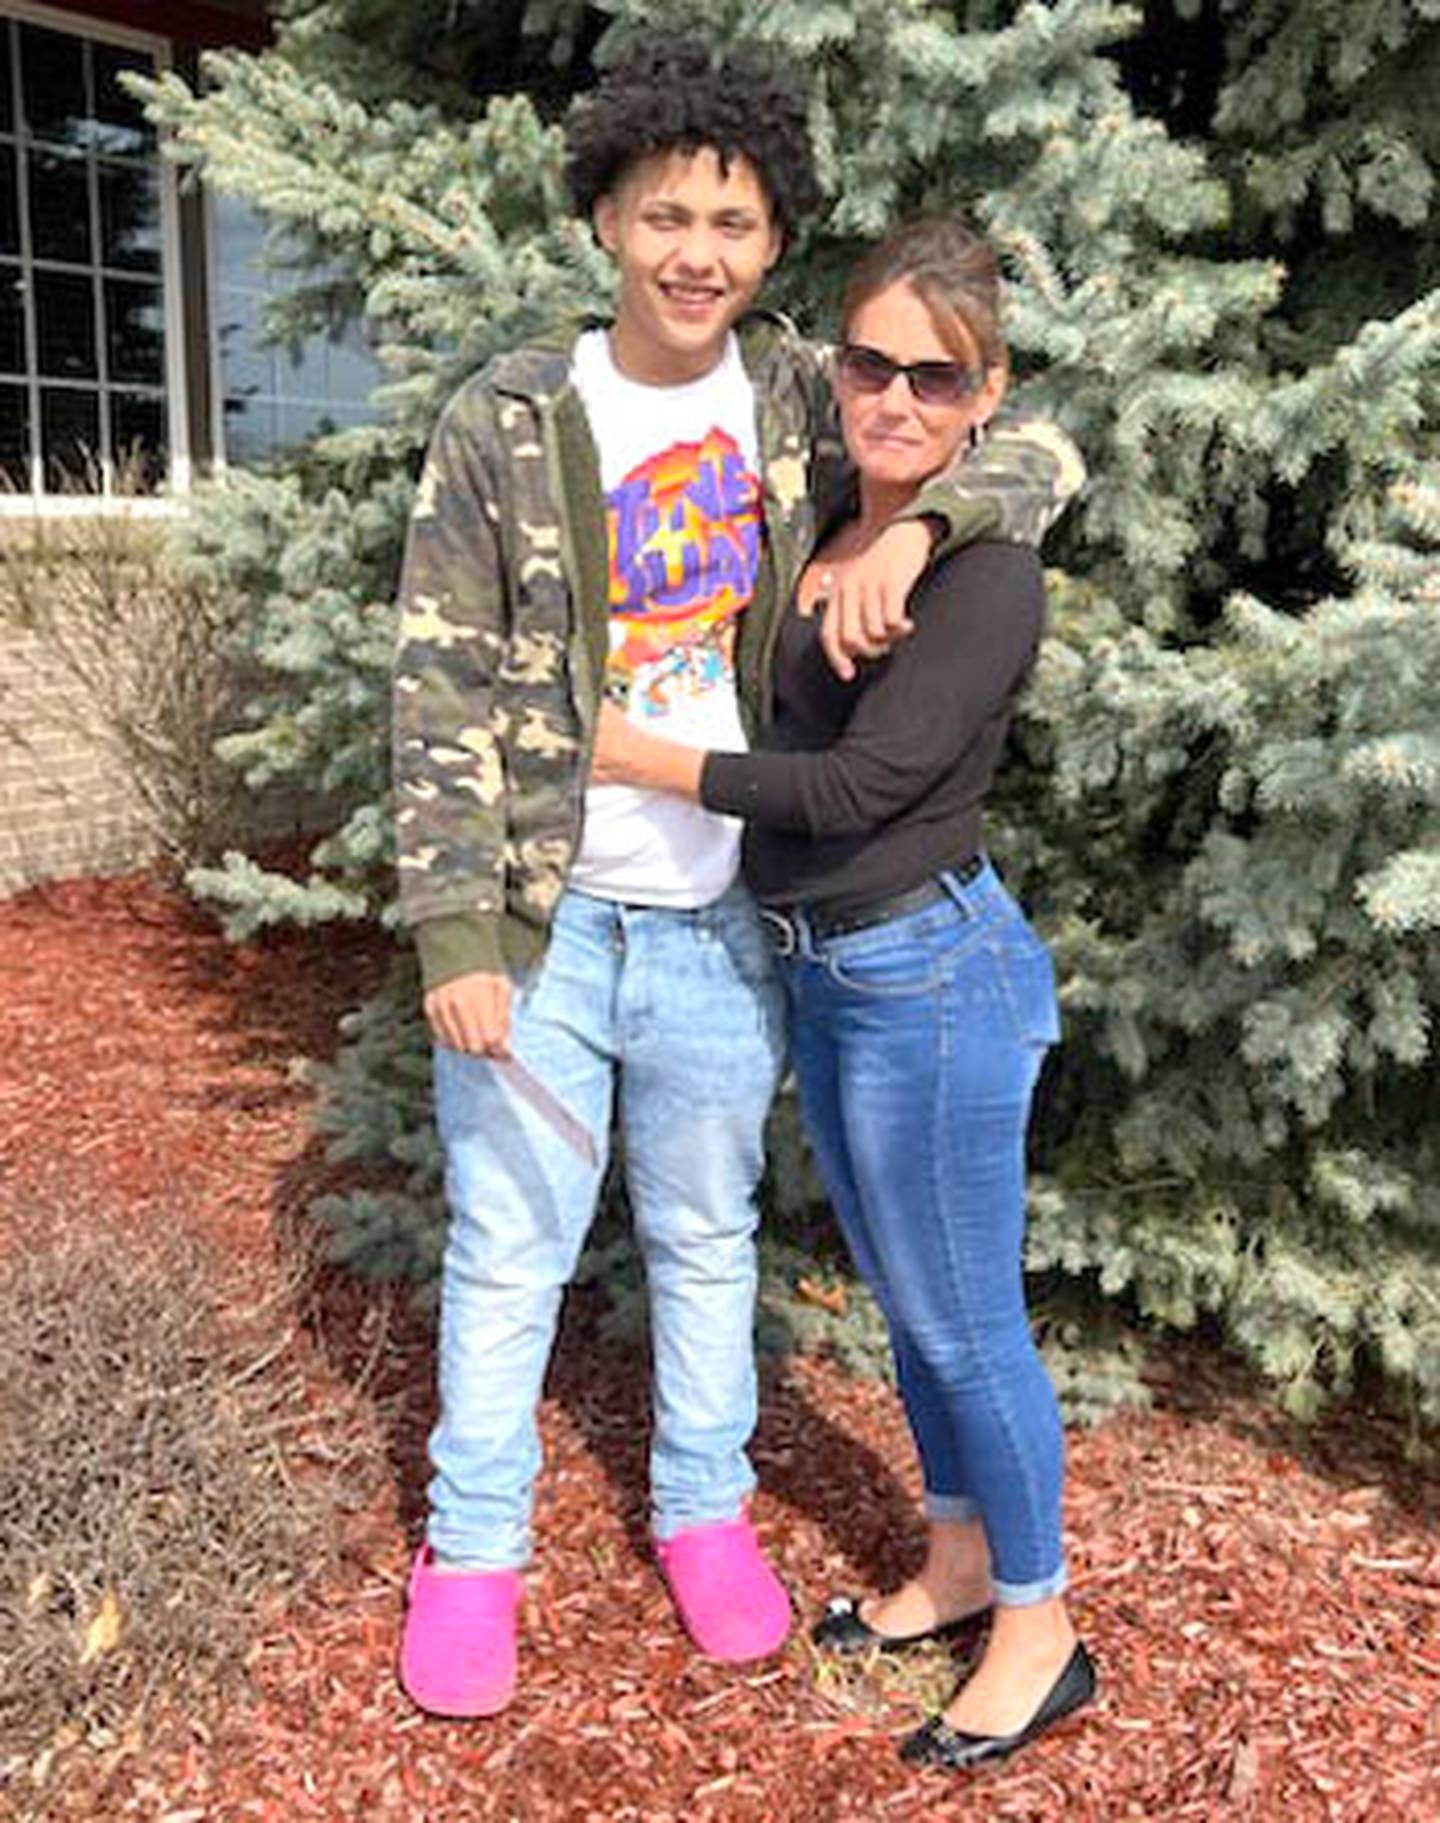 Diamonte Dailey (left), poses with his mother Tisha Davis (right), both of DeKalb, the day of his 18th birthday, April 3, 2022. Davis said the family went out to celebrate her son's birthday and then that evening, Dailey died from a fentanyl drug overdose. Madison Ricke, of DeKalb, is charged with drug-induced homicide in Dailey's death. (Photo provided by Tisha Davis)